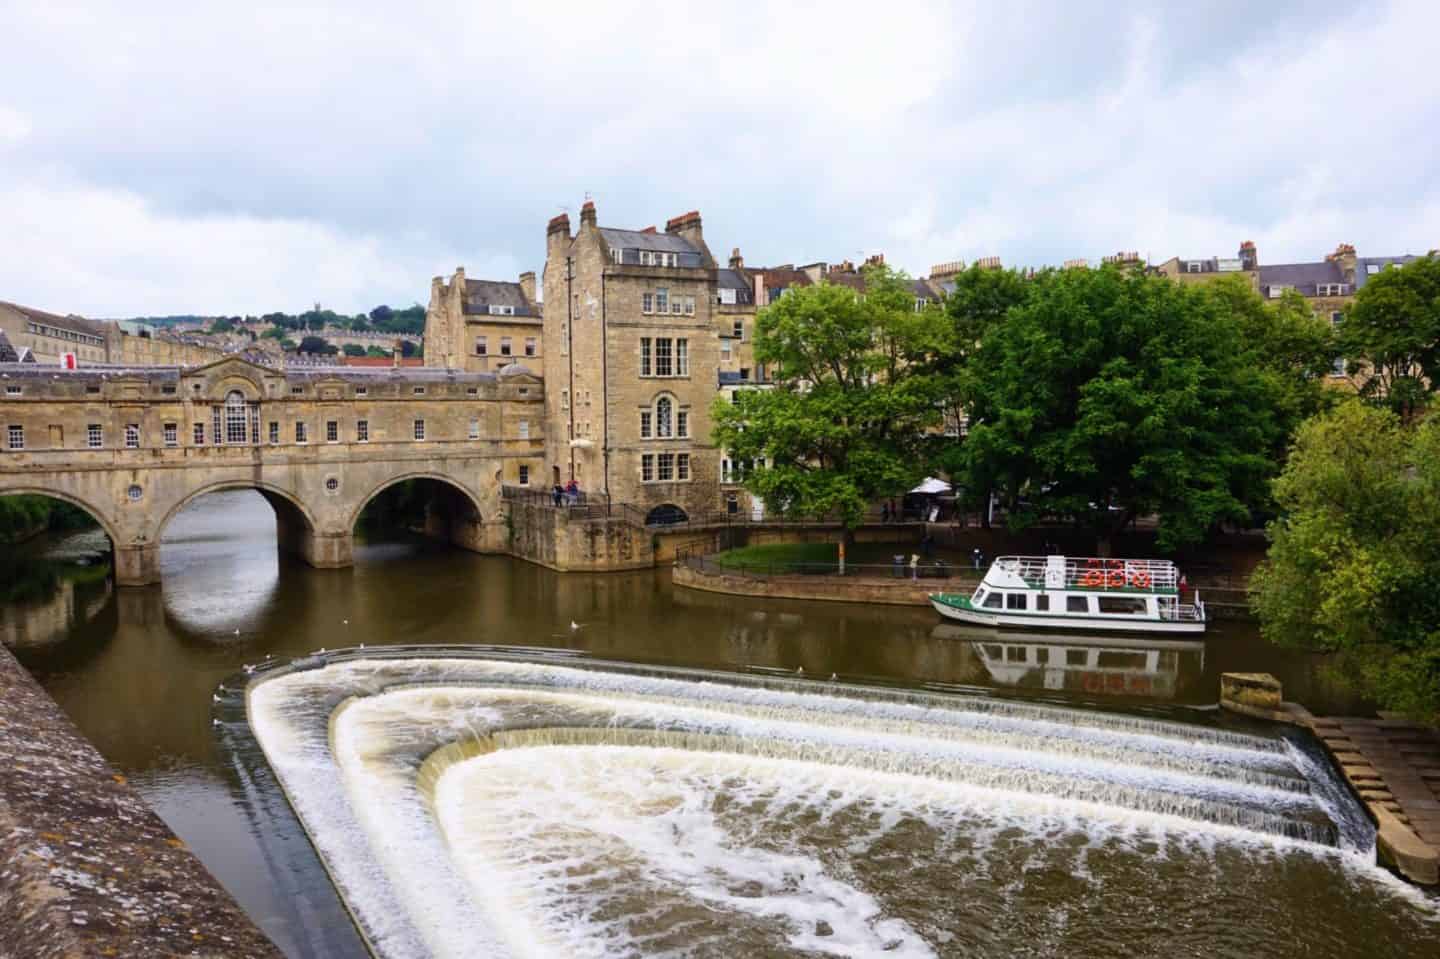 Day trip to Stonehenge and Bath from London